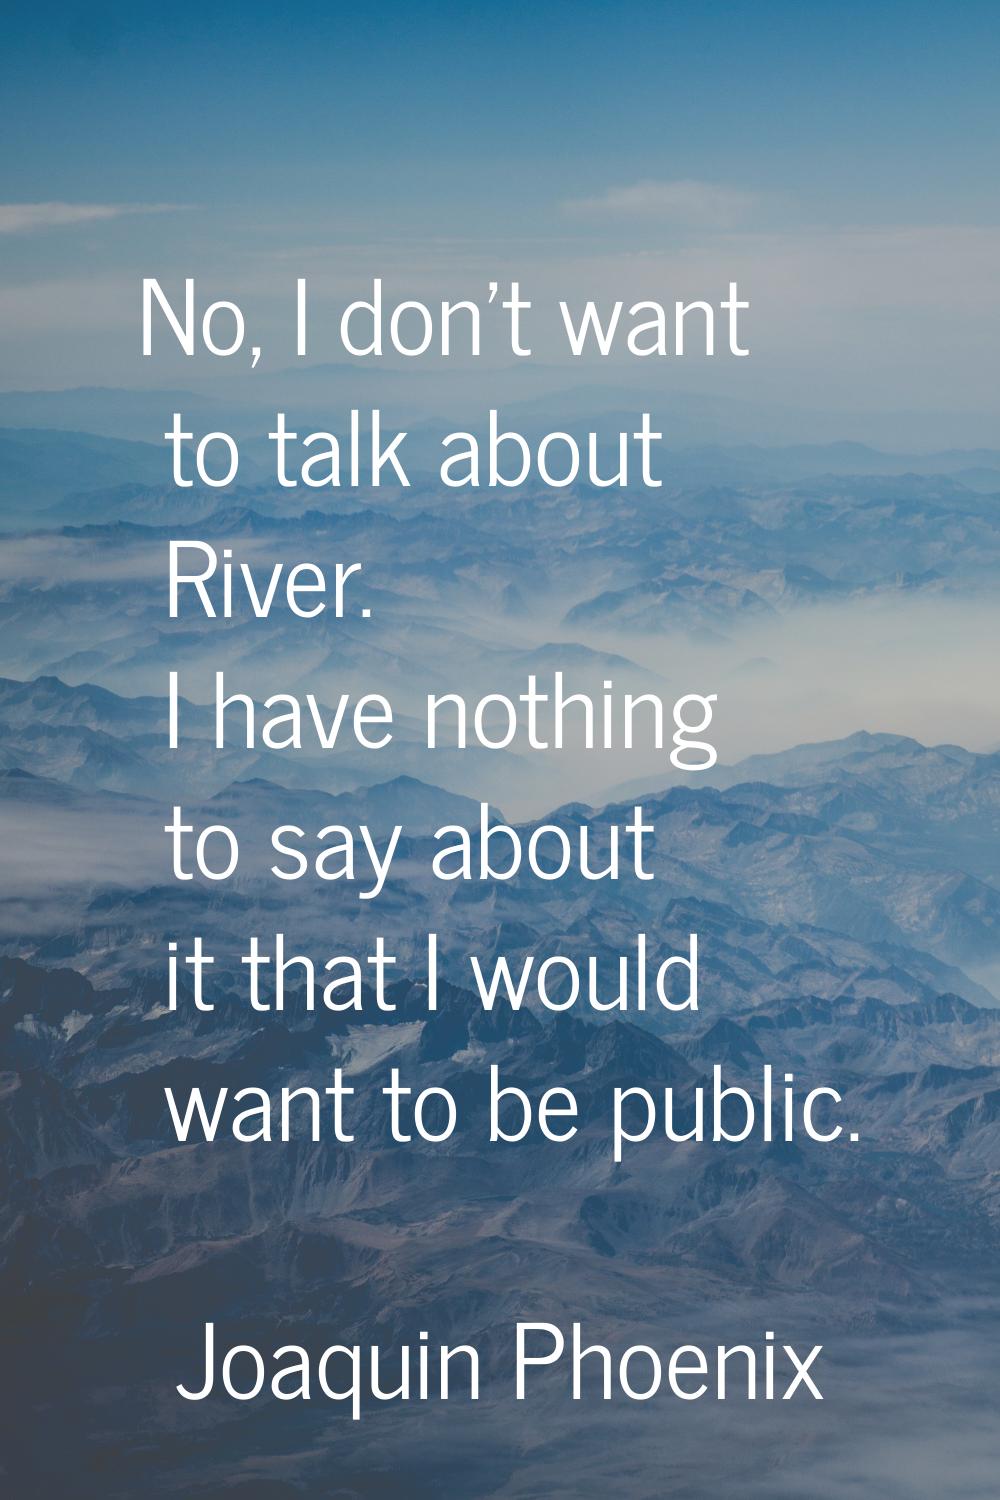 No, I don't want to talk about River. I have nothing to say about it that I would want to be public